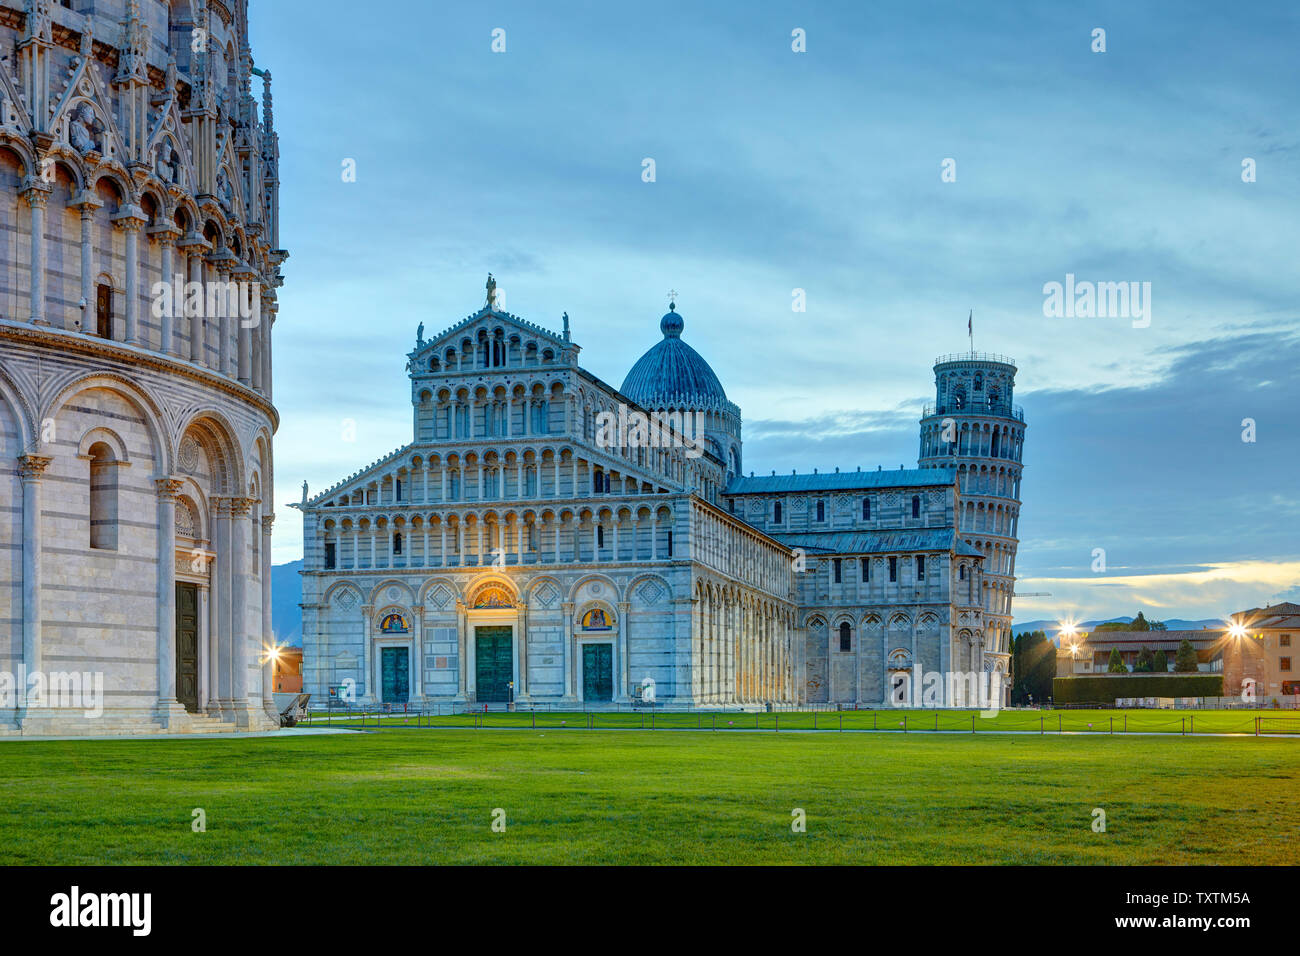 The Baptistery in the foreground, the Duomo and the leaning tower in the background, Pisa, Italy Stock Photo